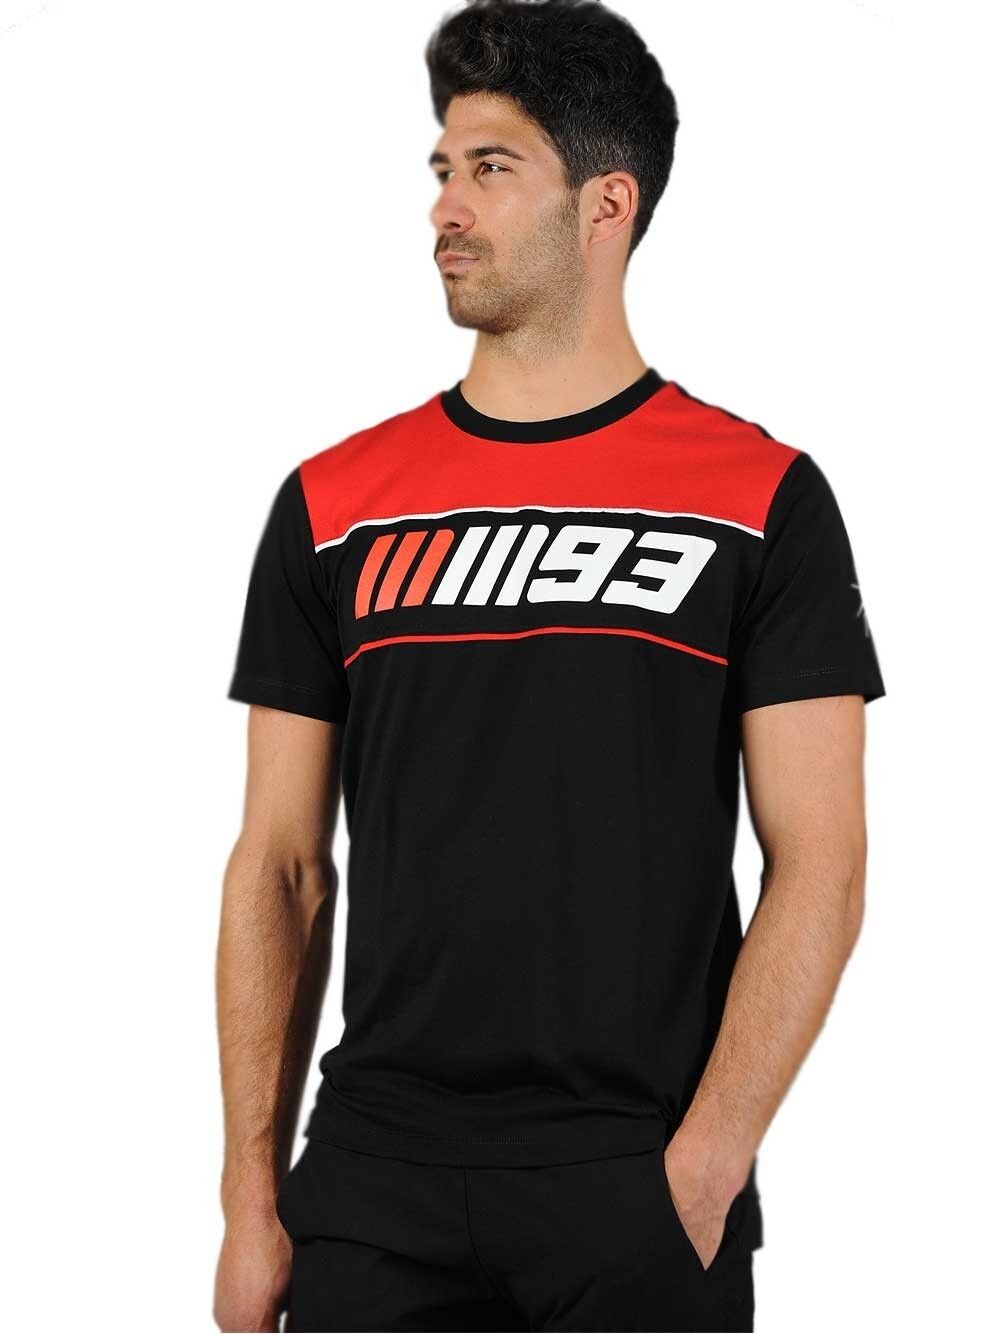 New Official Marc Marquez 93 Inserted T-Shirt - 16 33074